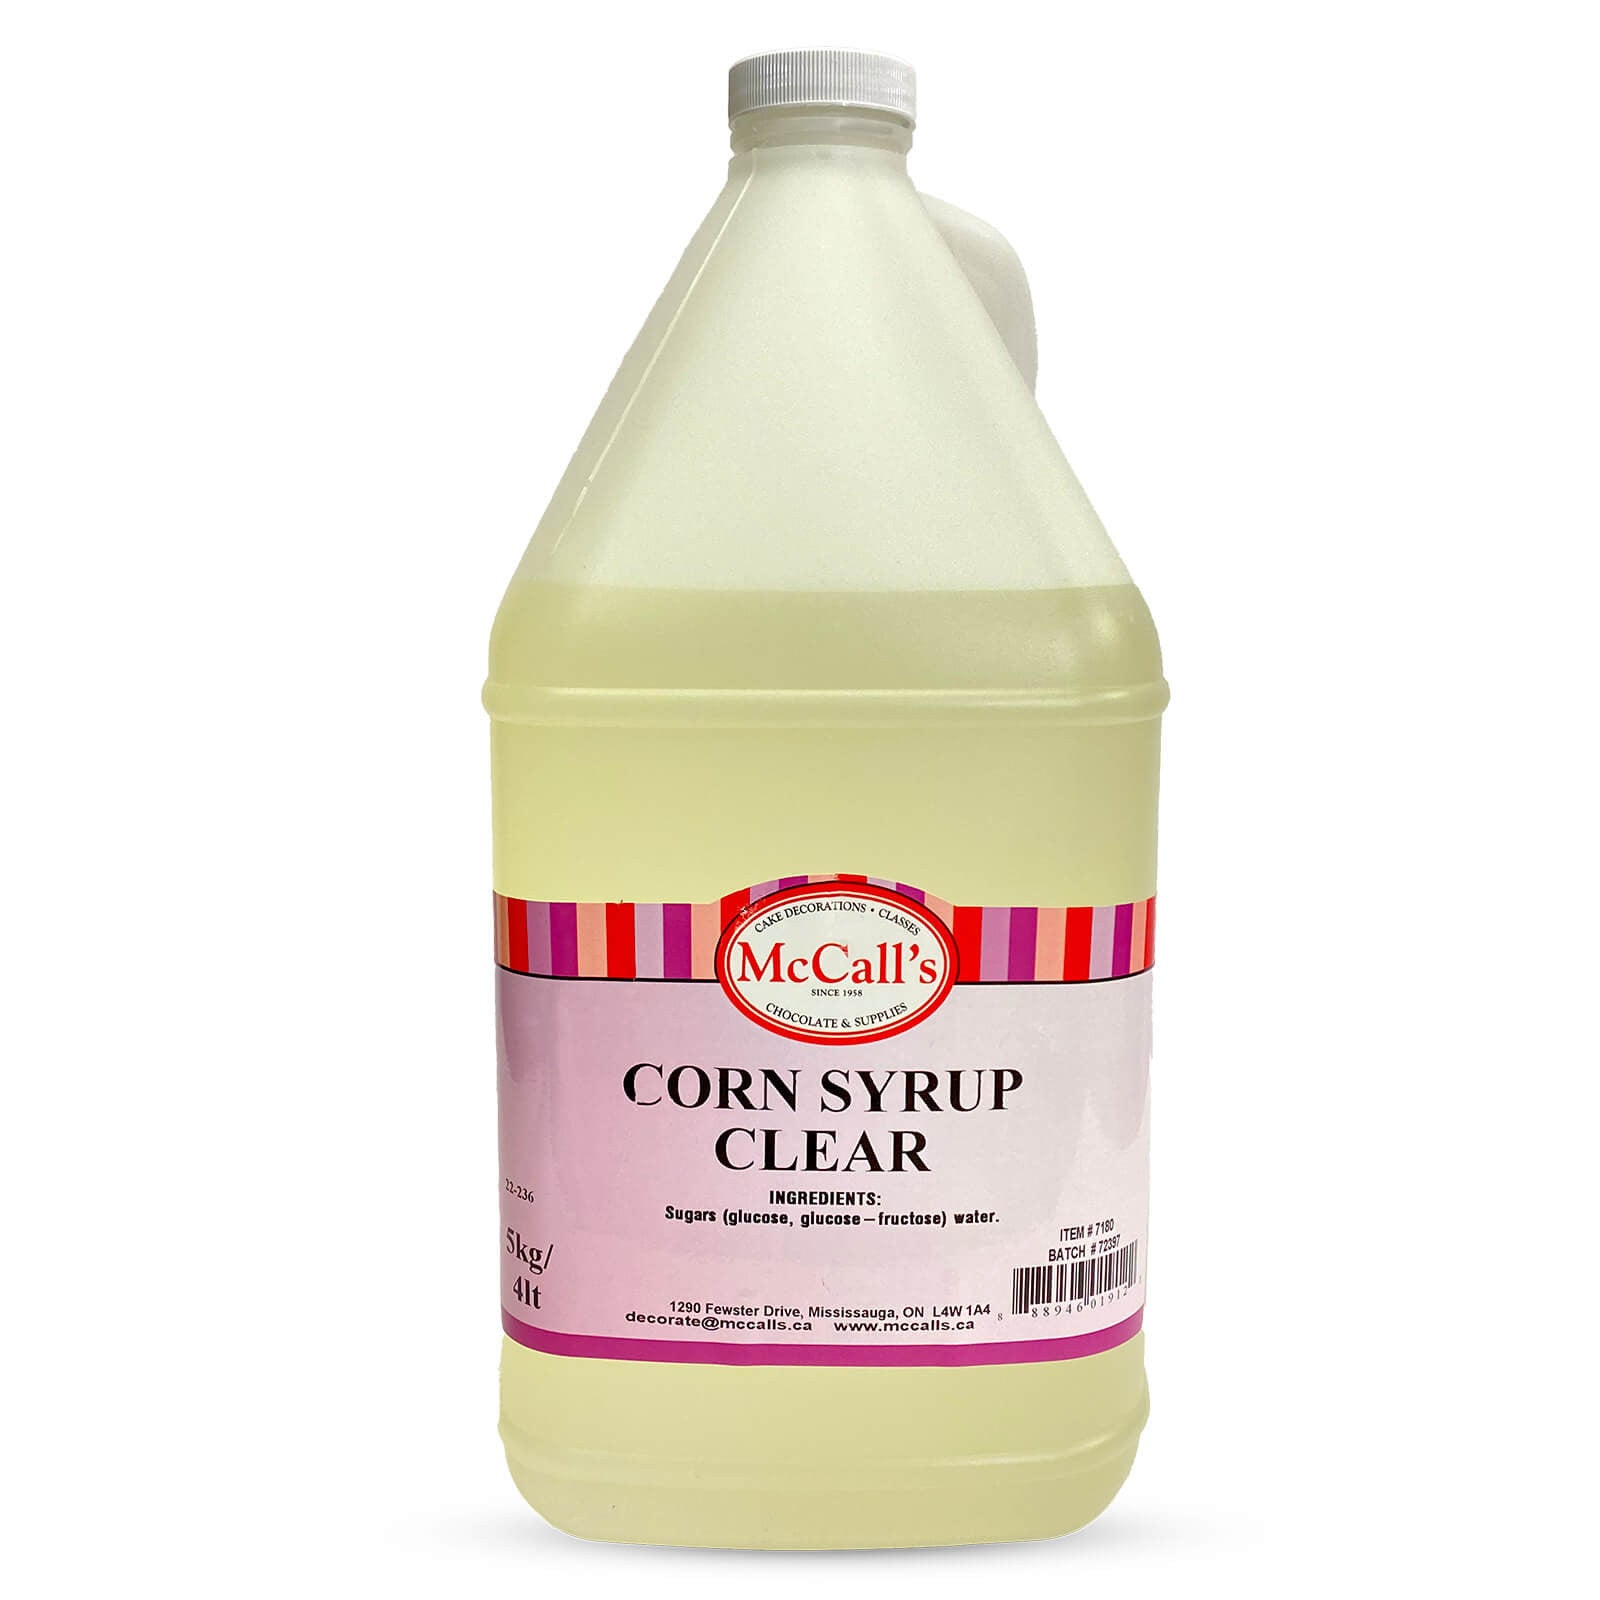 McCall's Corn Syrup Clear